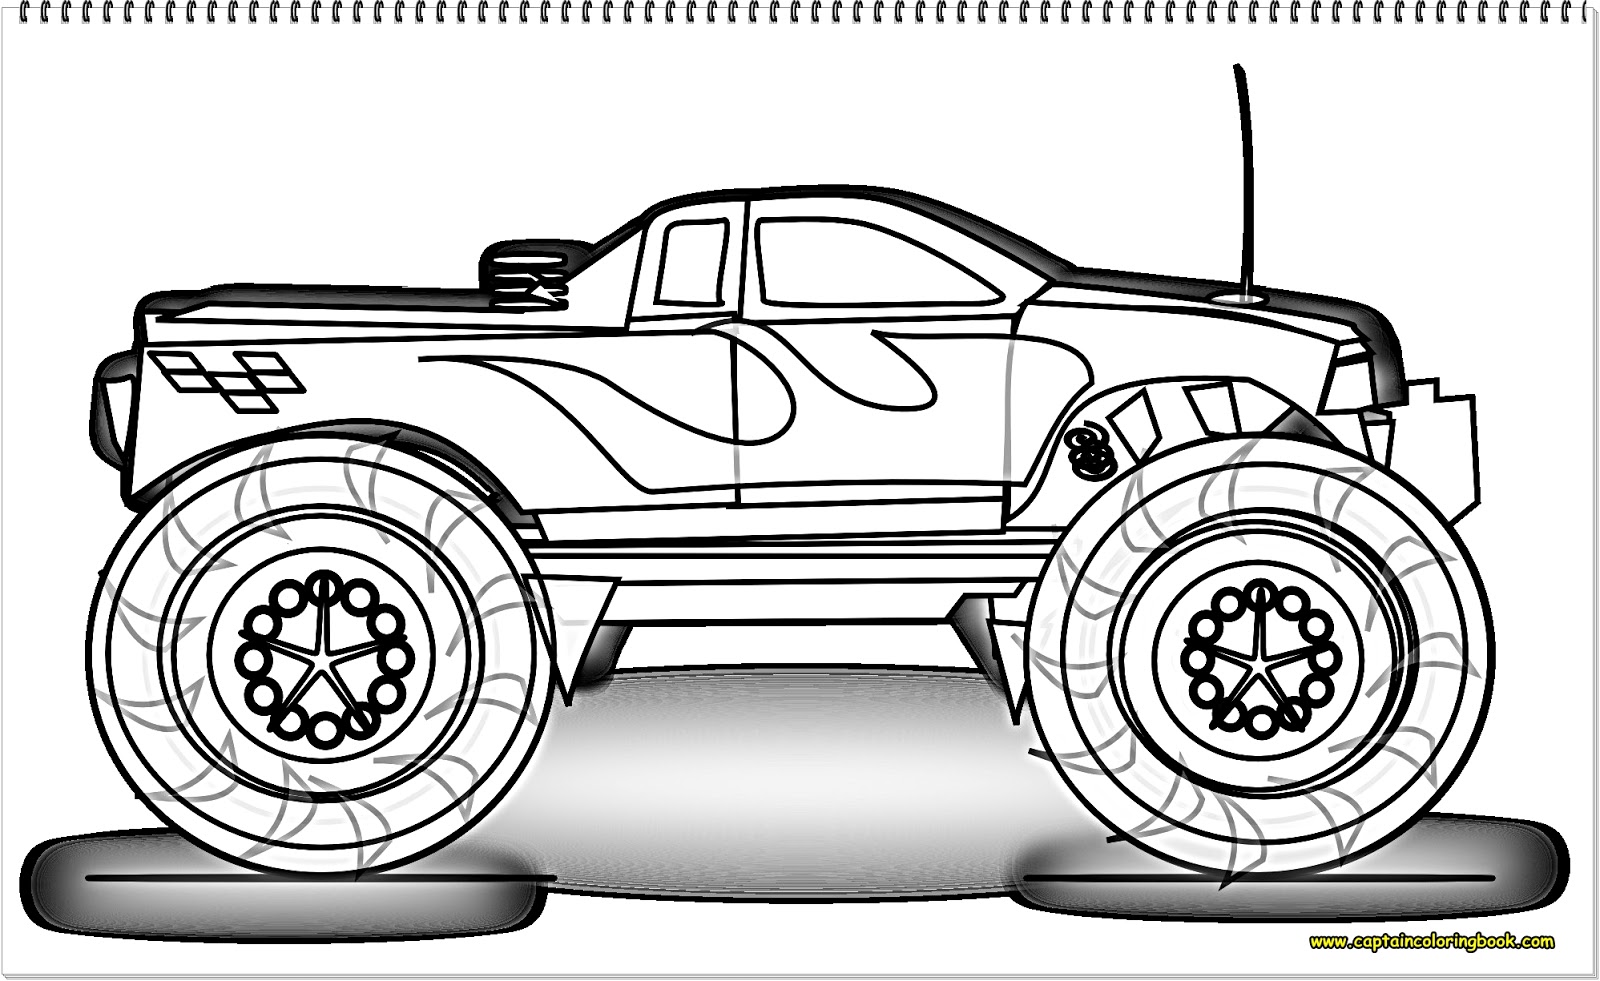 Thank you for seeing gallery of Free Coloring Pages For Boys Cars we would be very happy if you e back Free Coloring Pages